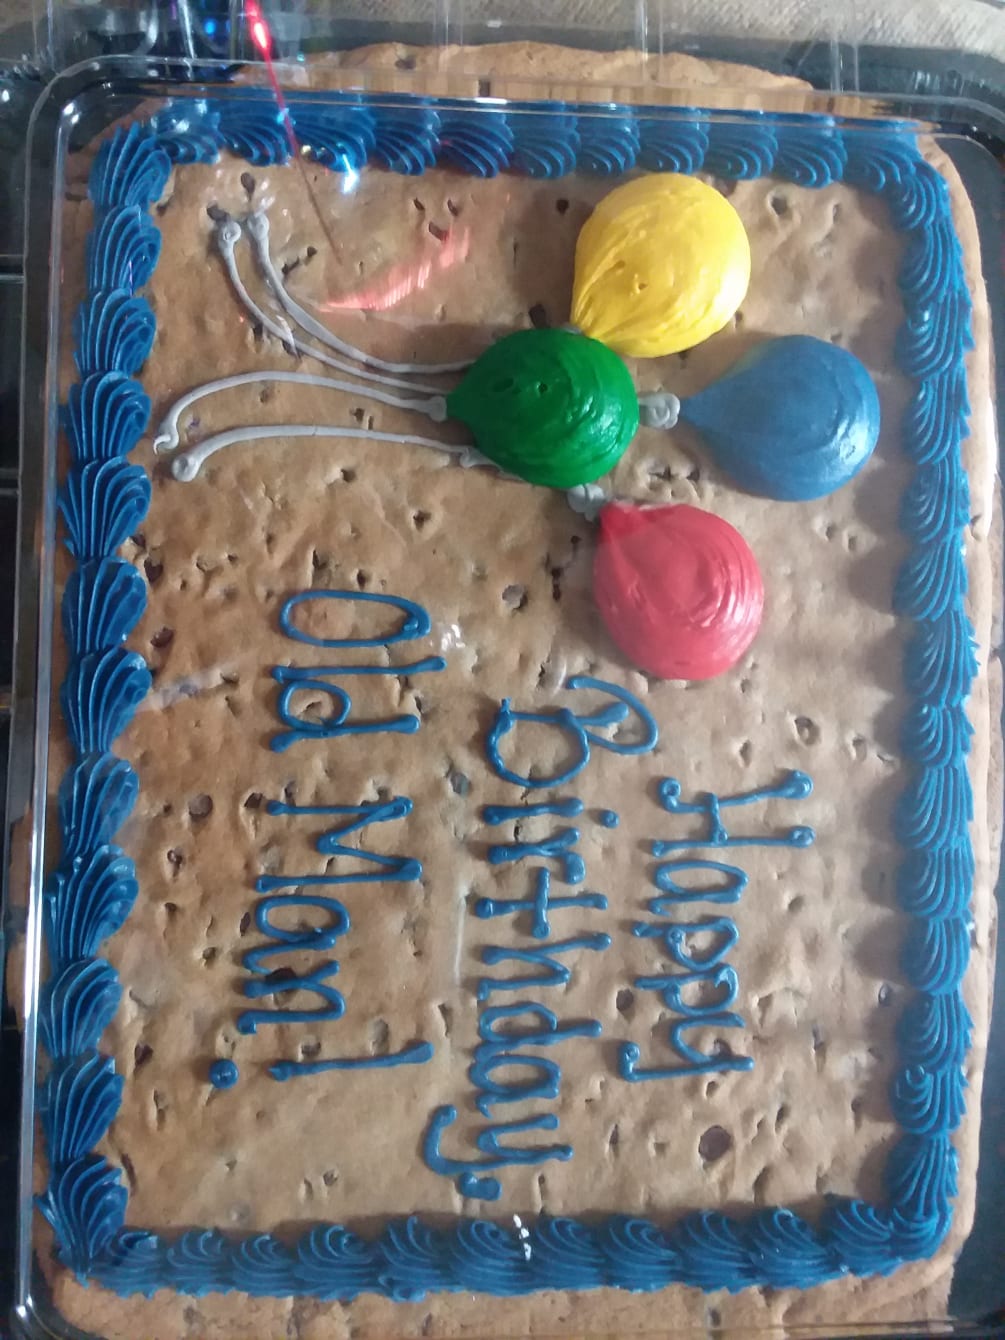 Freshly baked/frosted cookie cake, for any occasion. Can be custom decorated...include instructions